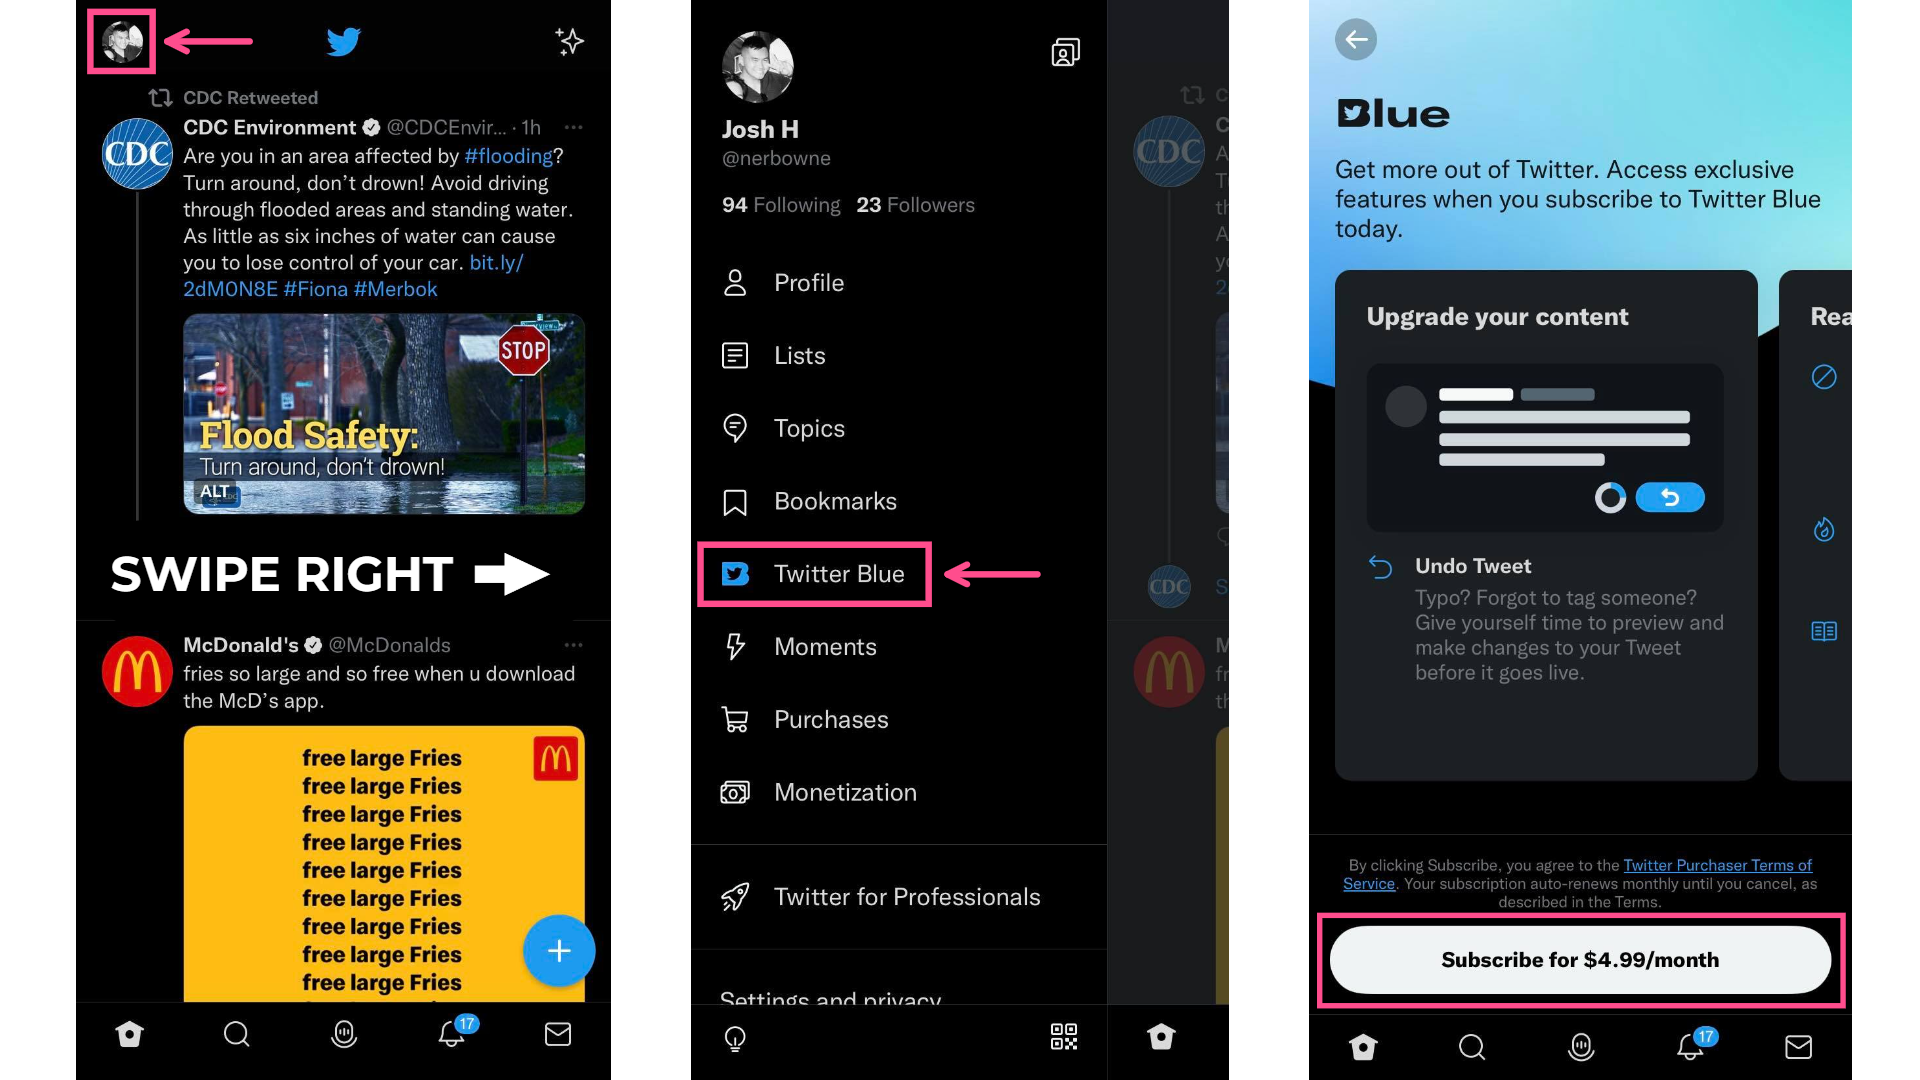 Screenshots showing how to get a Twitter Blue subscription on a mobile device